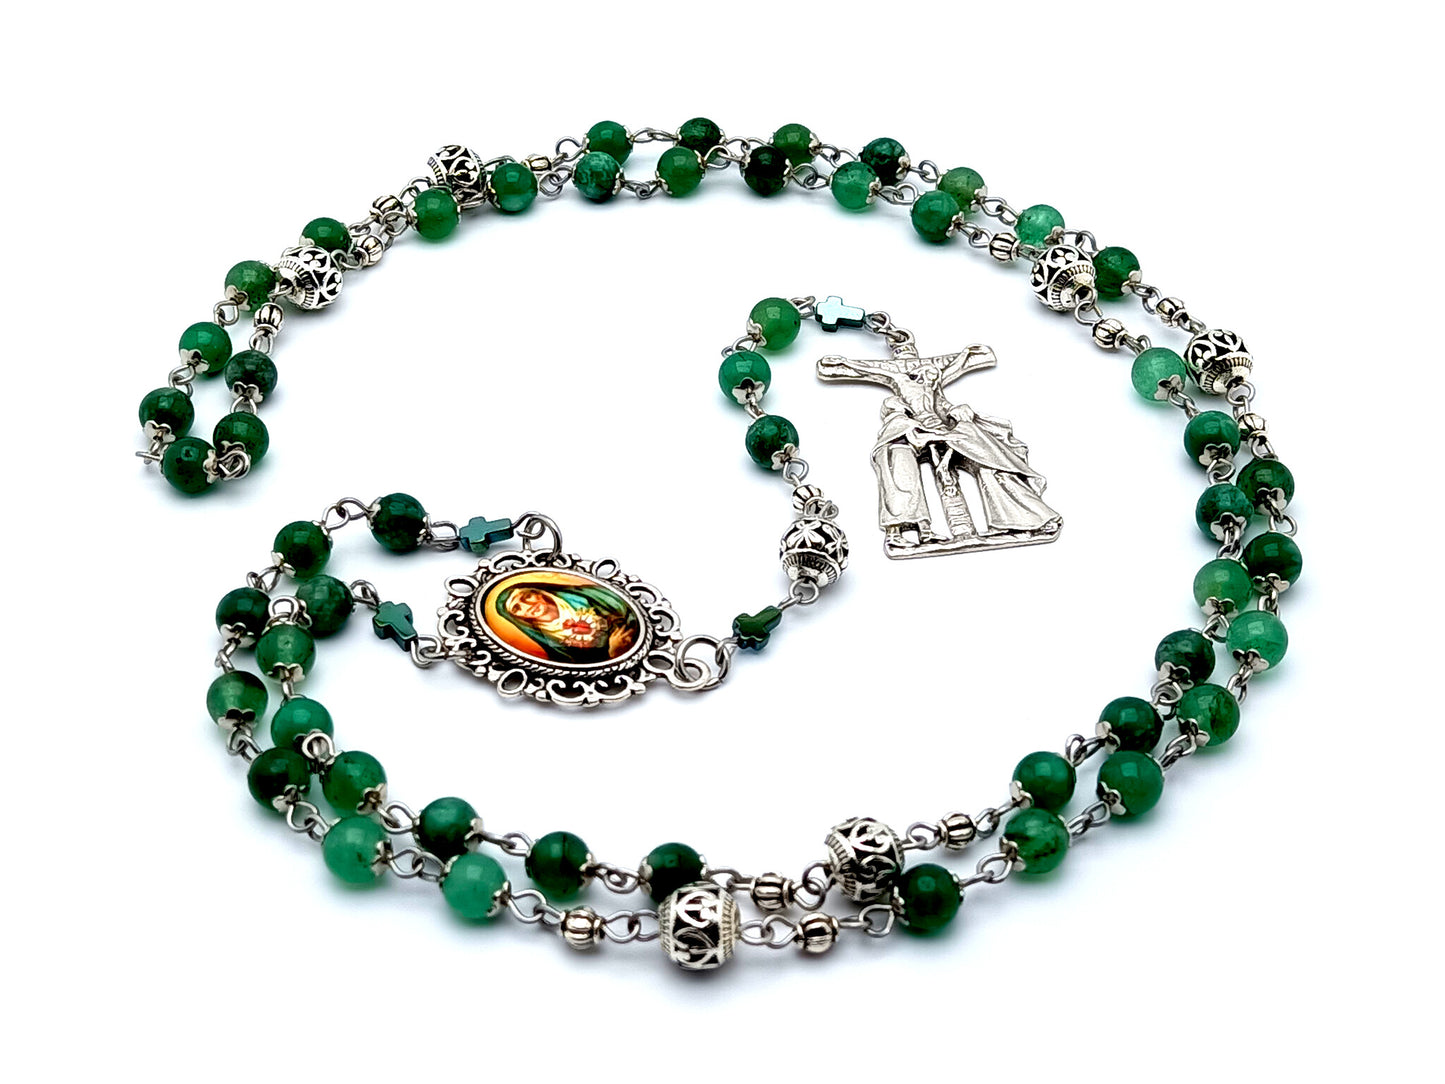 Our Lady of Sorrows unique rosary beads dolor prayer chaplet in agate gemstones and silver beads with Saint John and Mary at the foot of the cross crucifix.